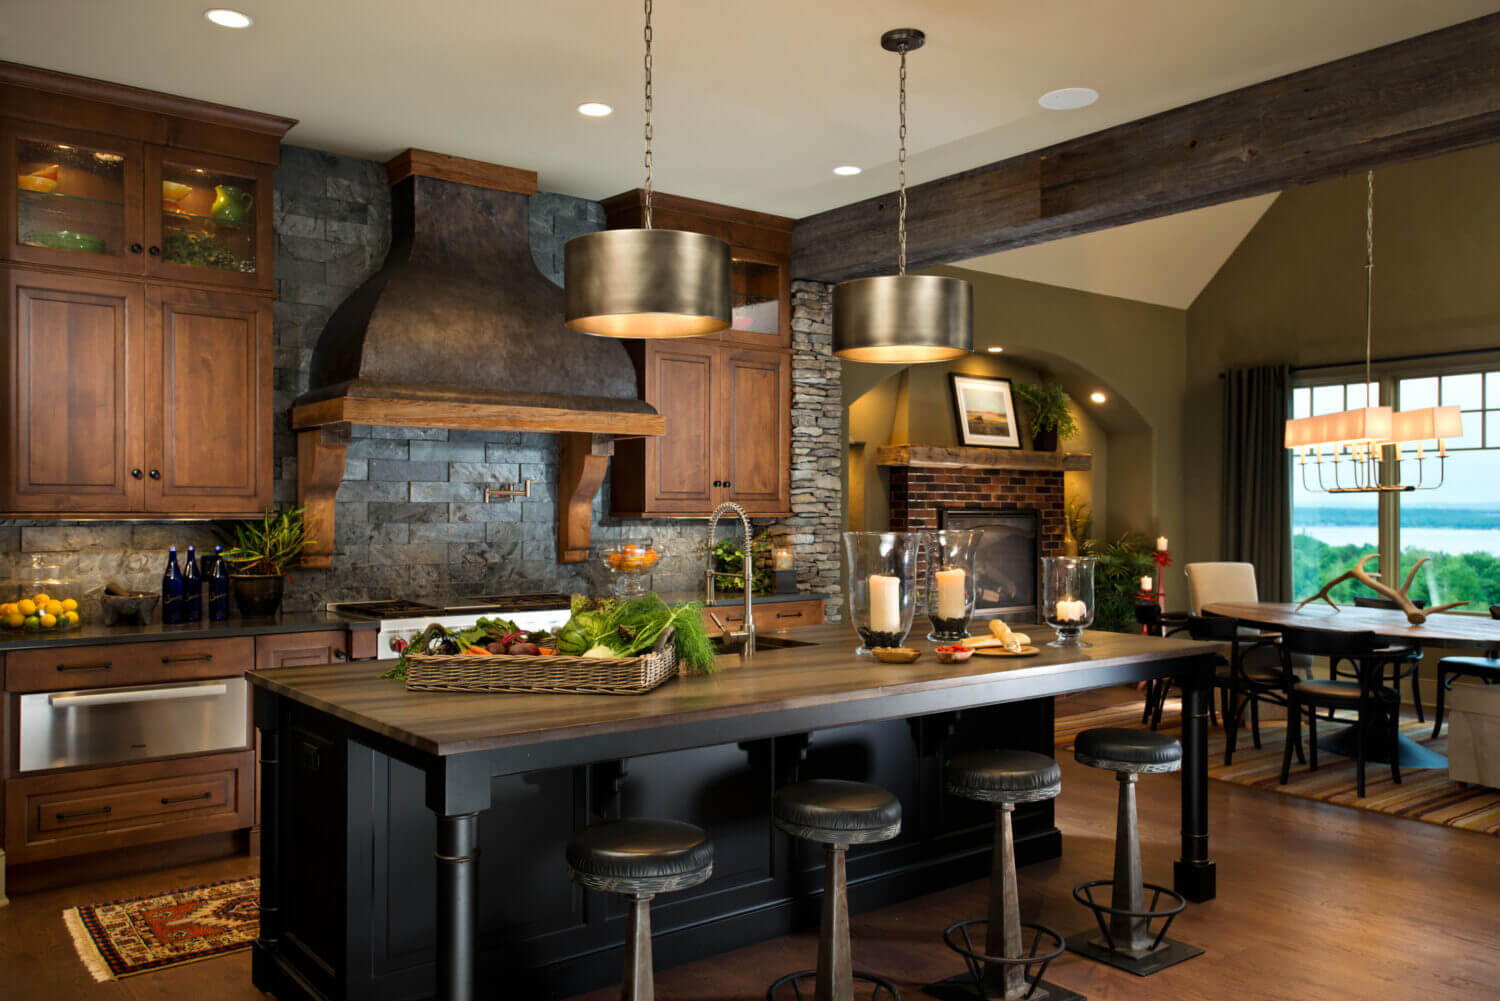 A Rustic Traditional styled kitchen design with a grand wood and metal hood, dark painted kitchen island, and distressed wood cabinets.